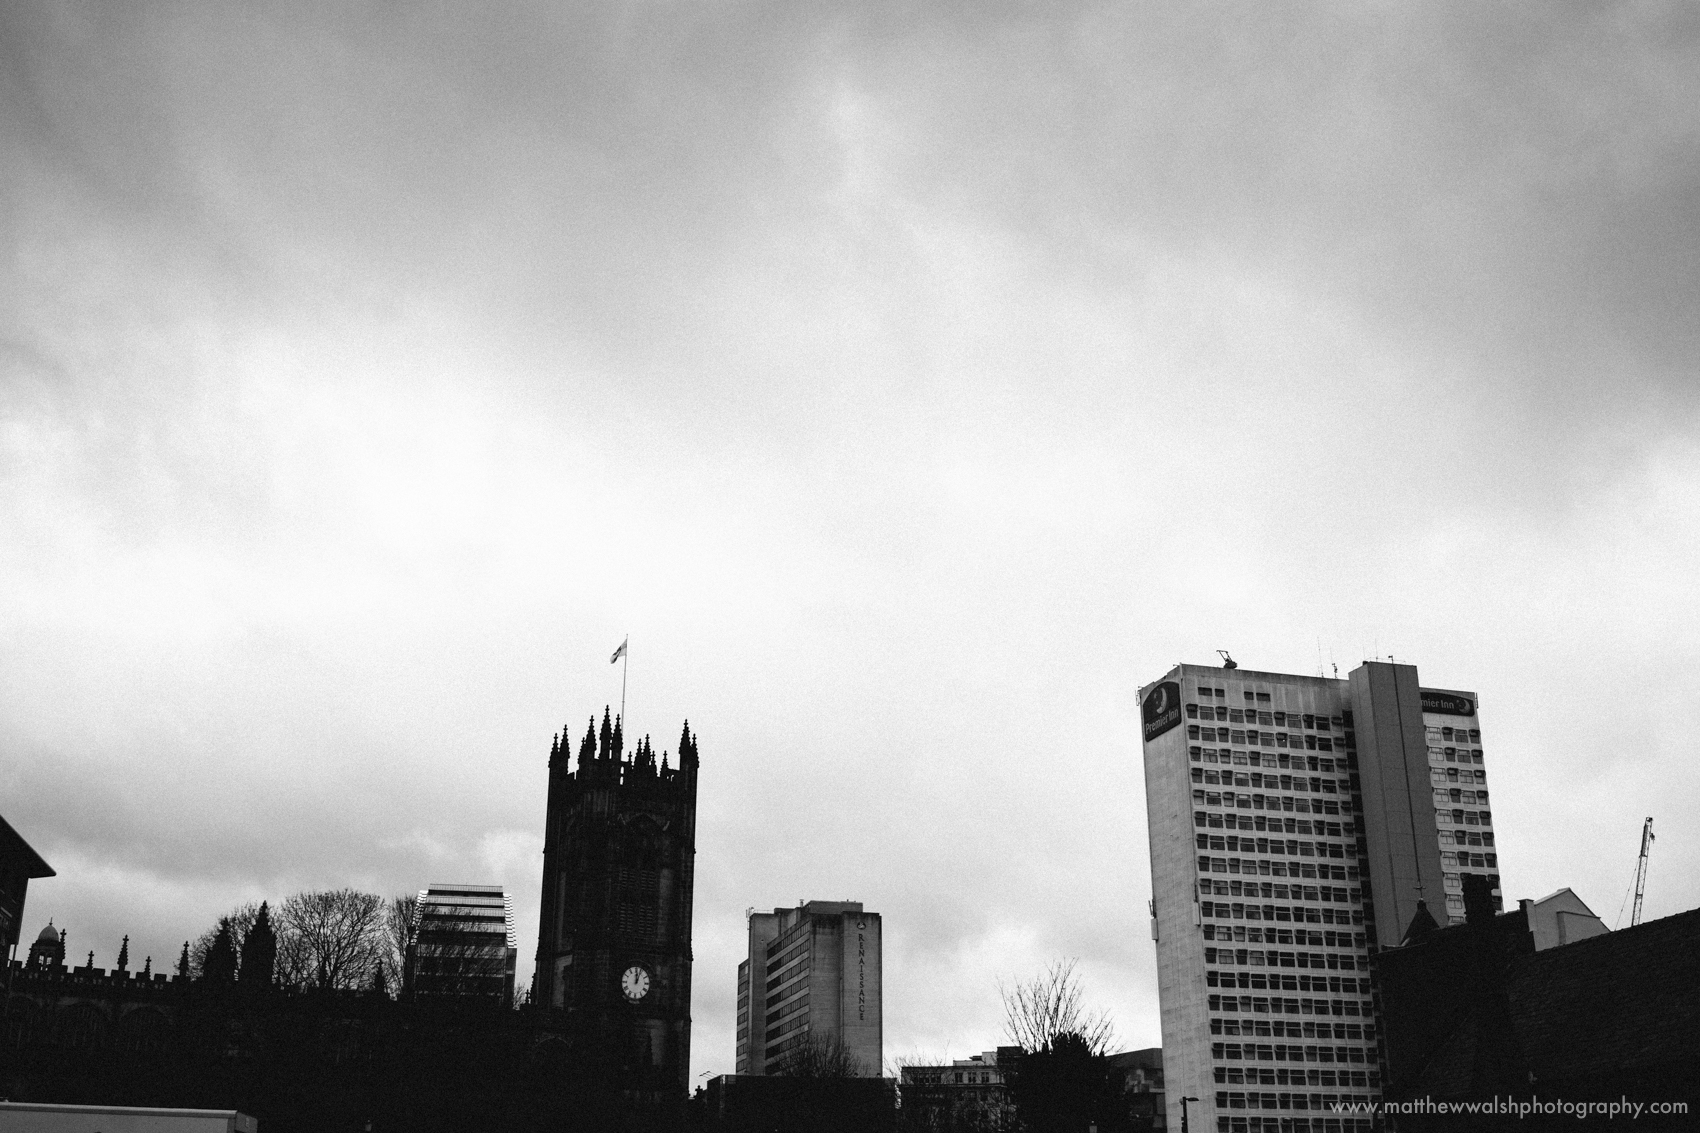 Manchester skyline on a gloomy January day adding context to the story of the day